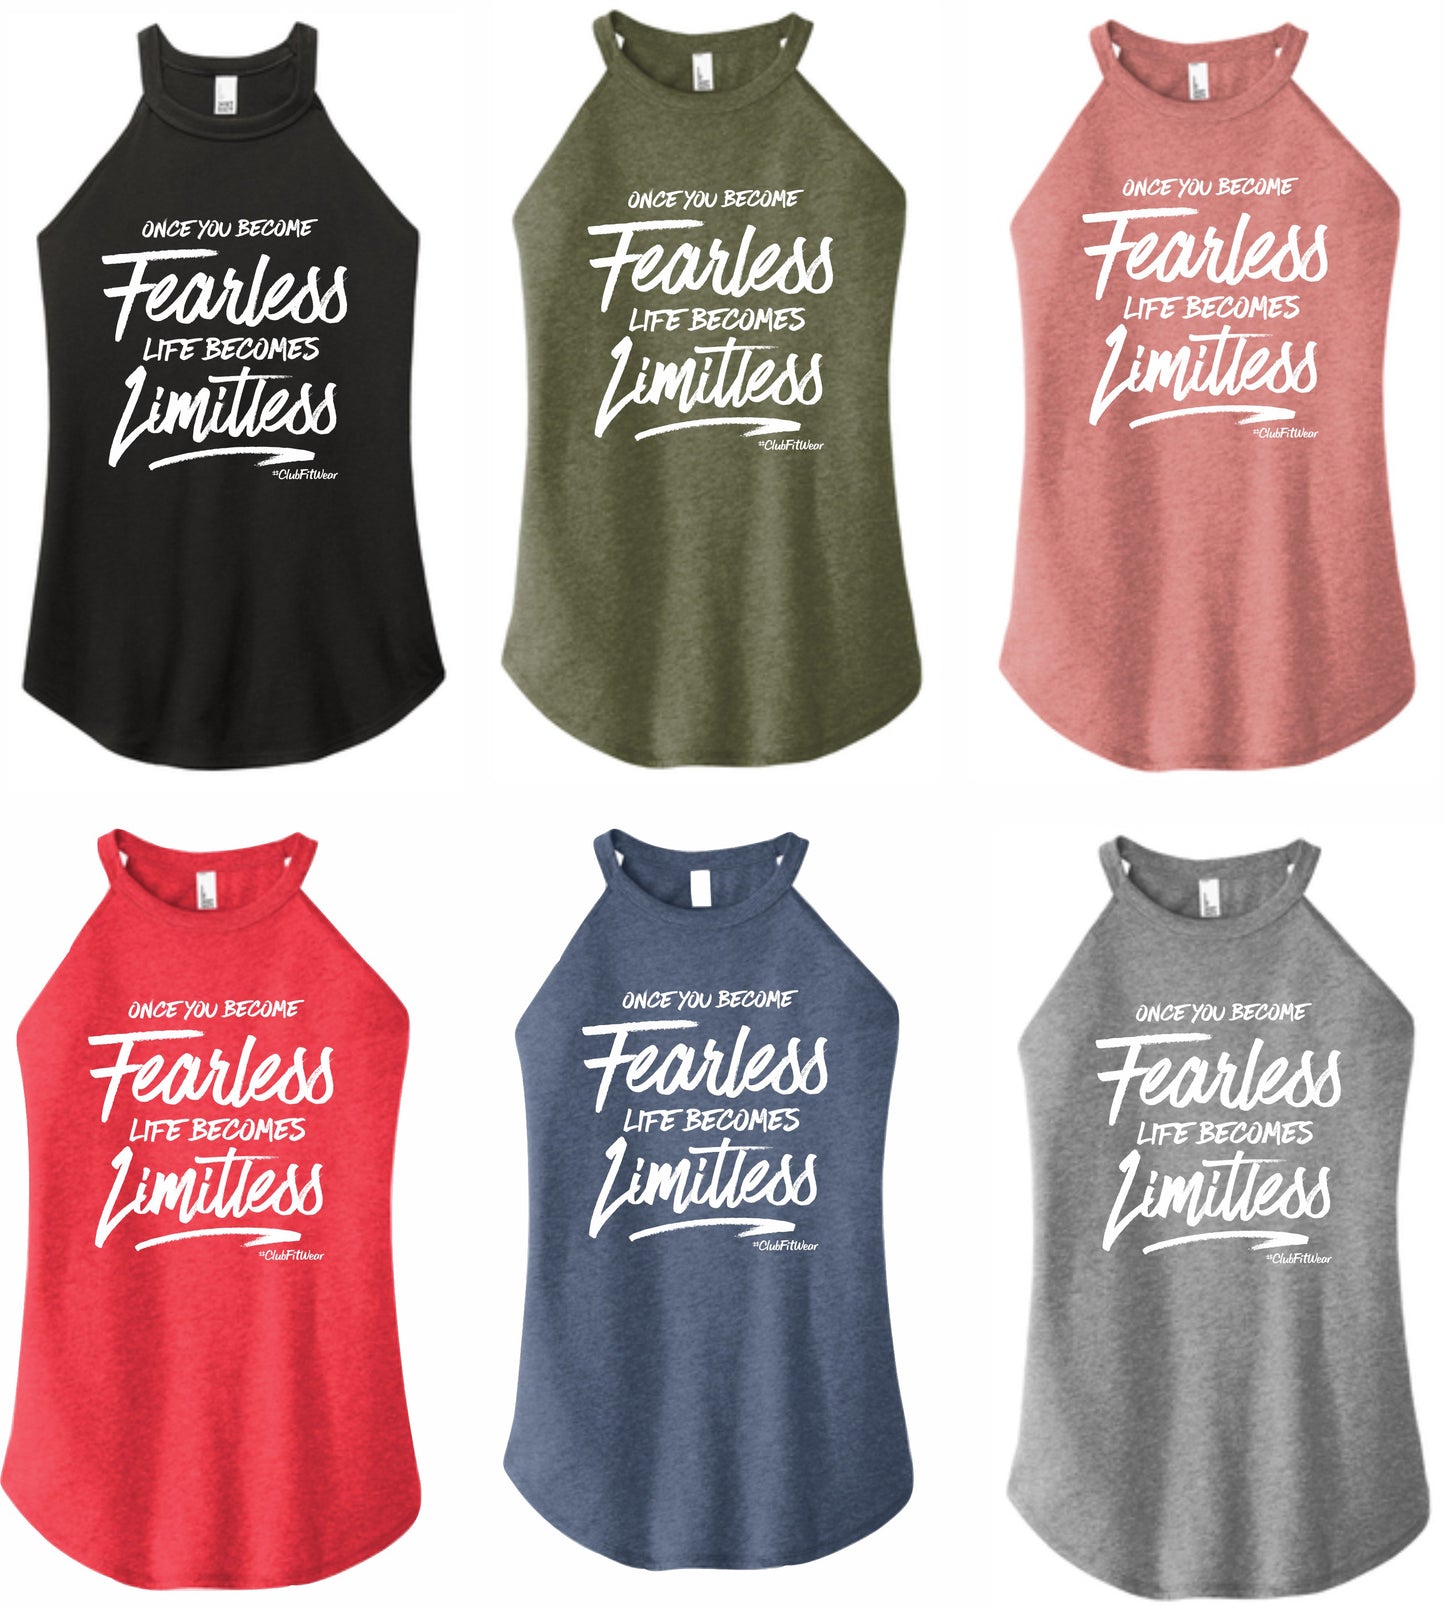 Once You Become Fearless Life Becomes Limitless - High Neck Rocker Tank